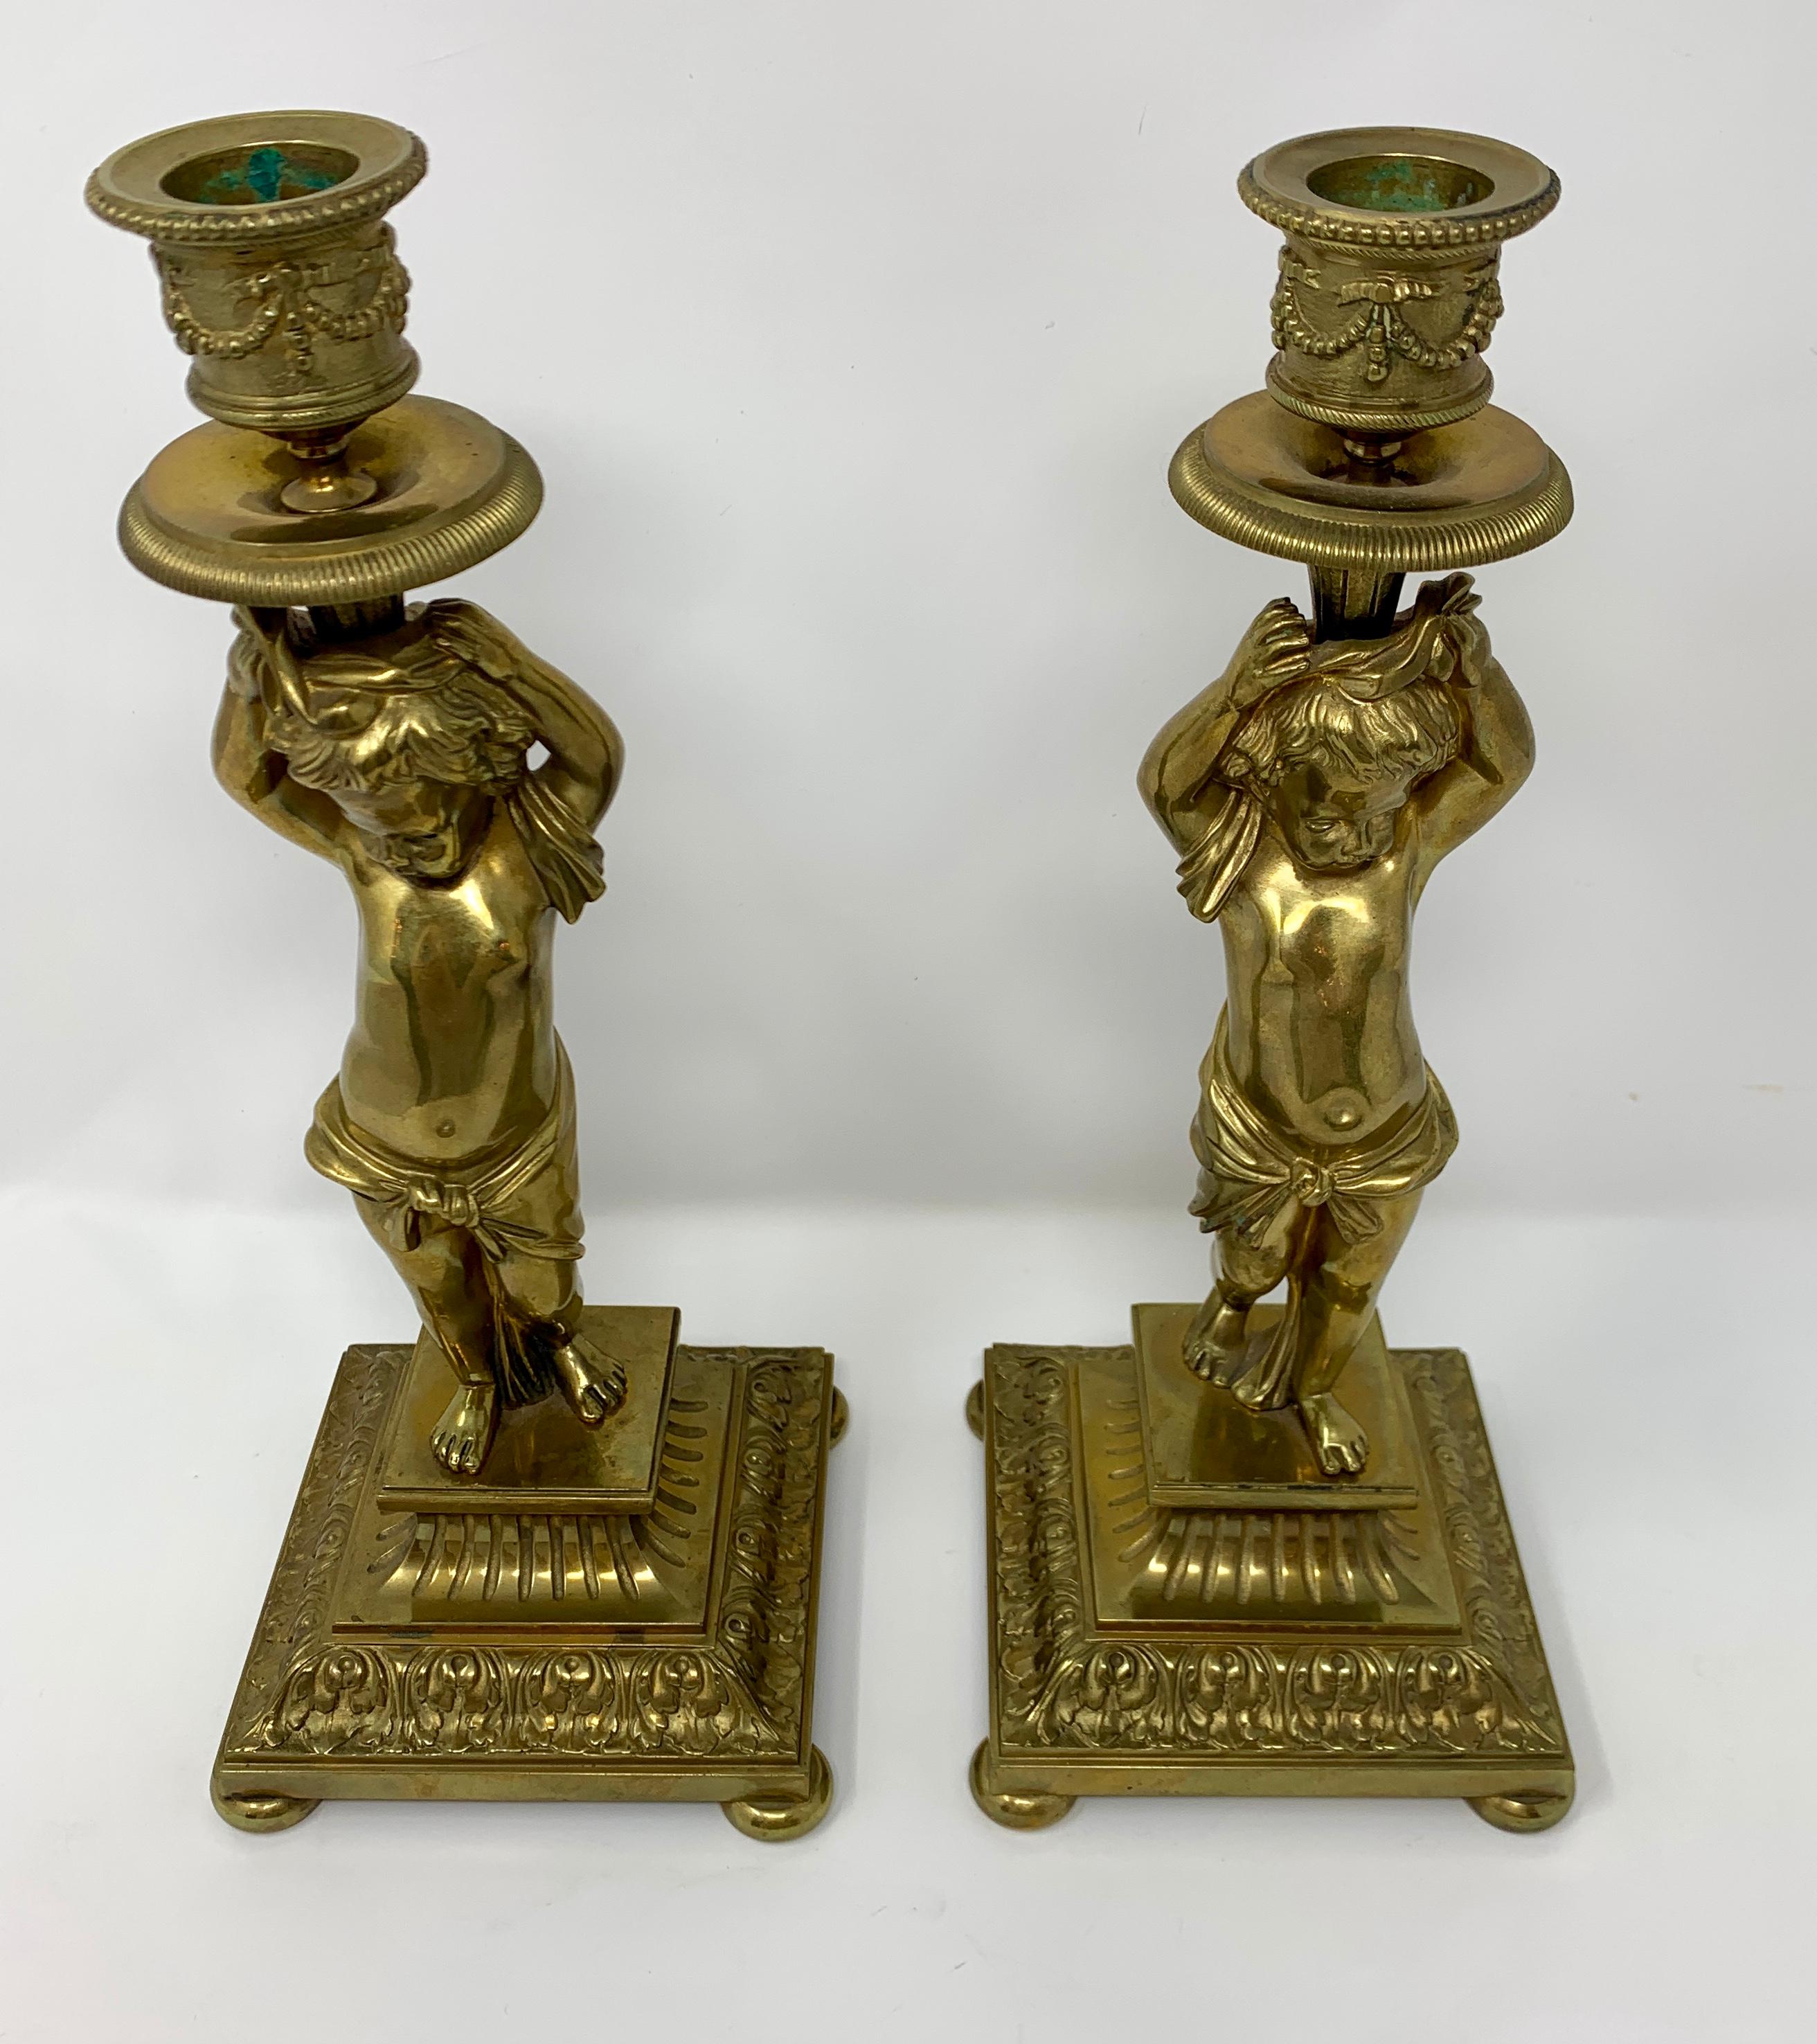 A charming pair of cupid candlesticks.